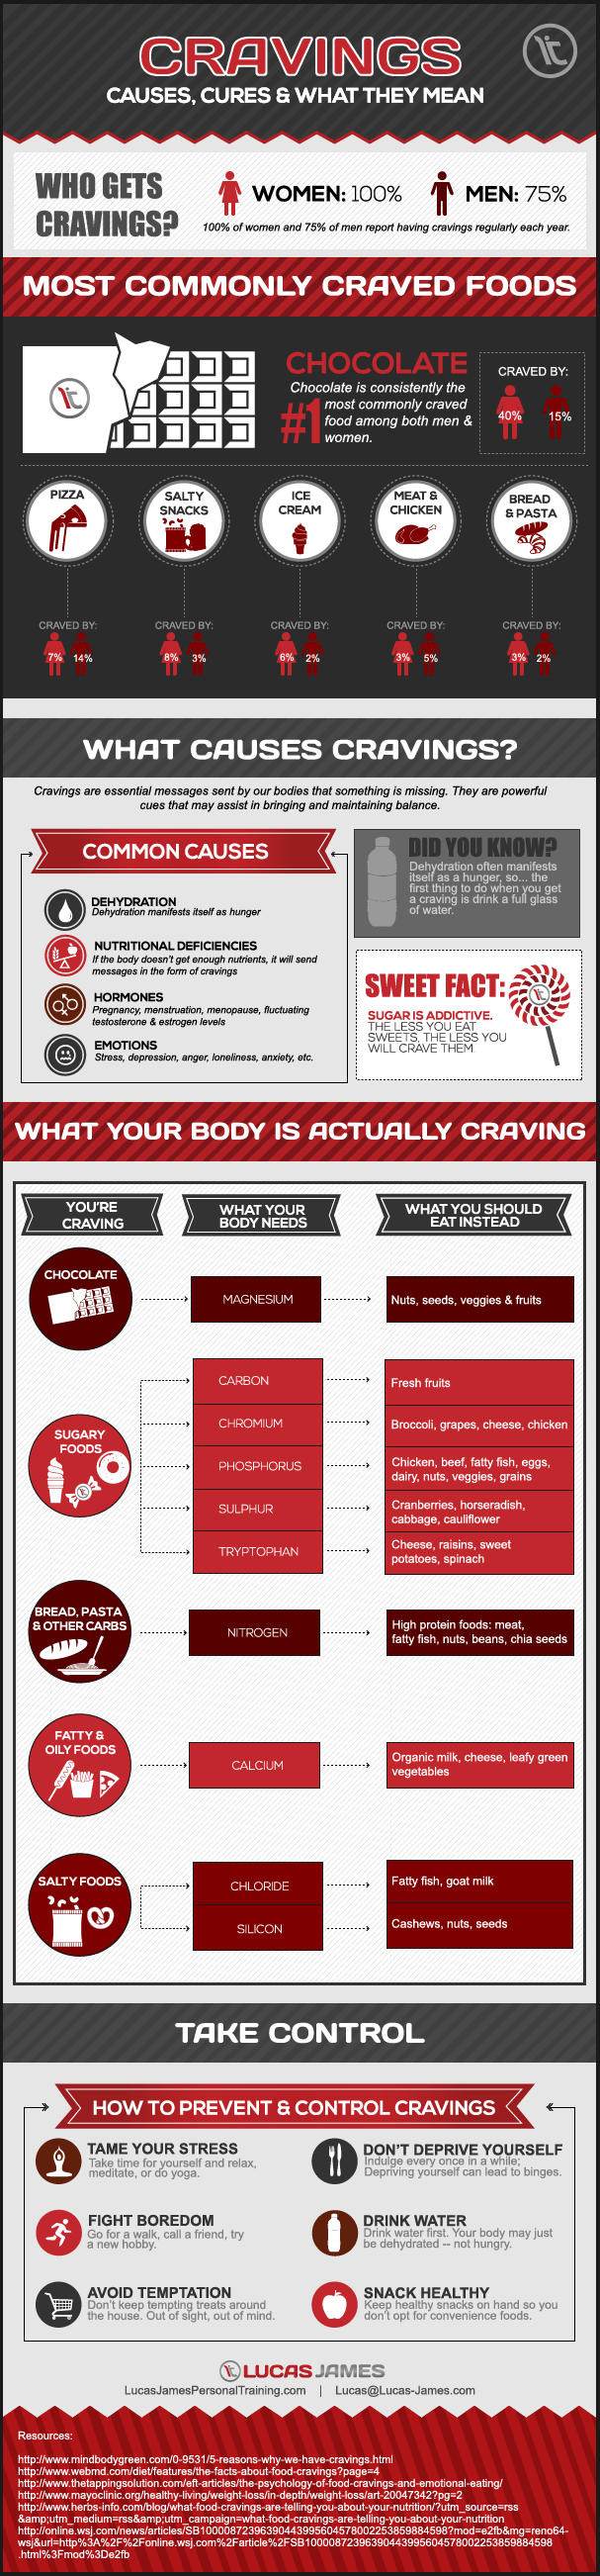 Cravings: Causes, Cures and What They Mean